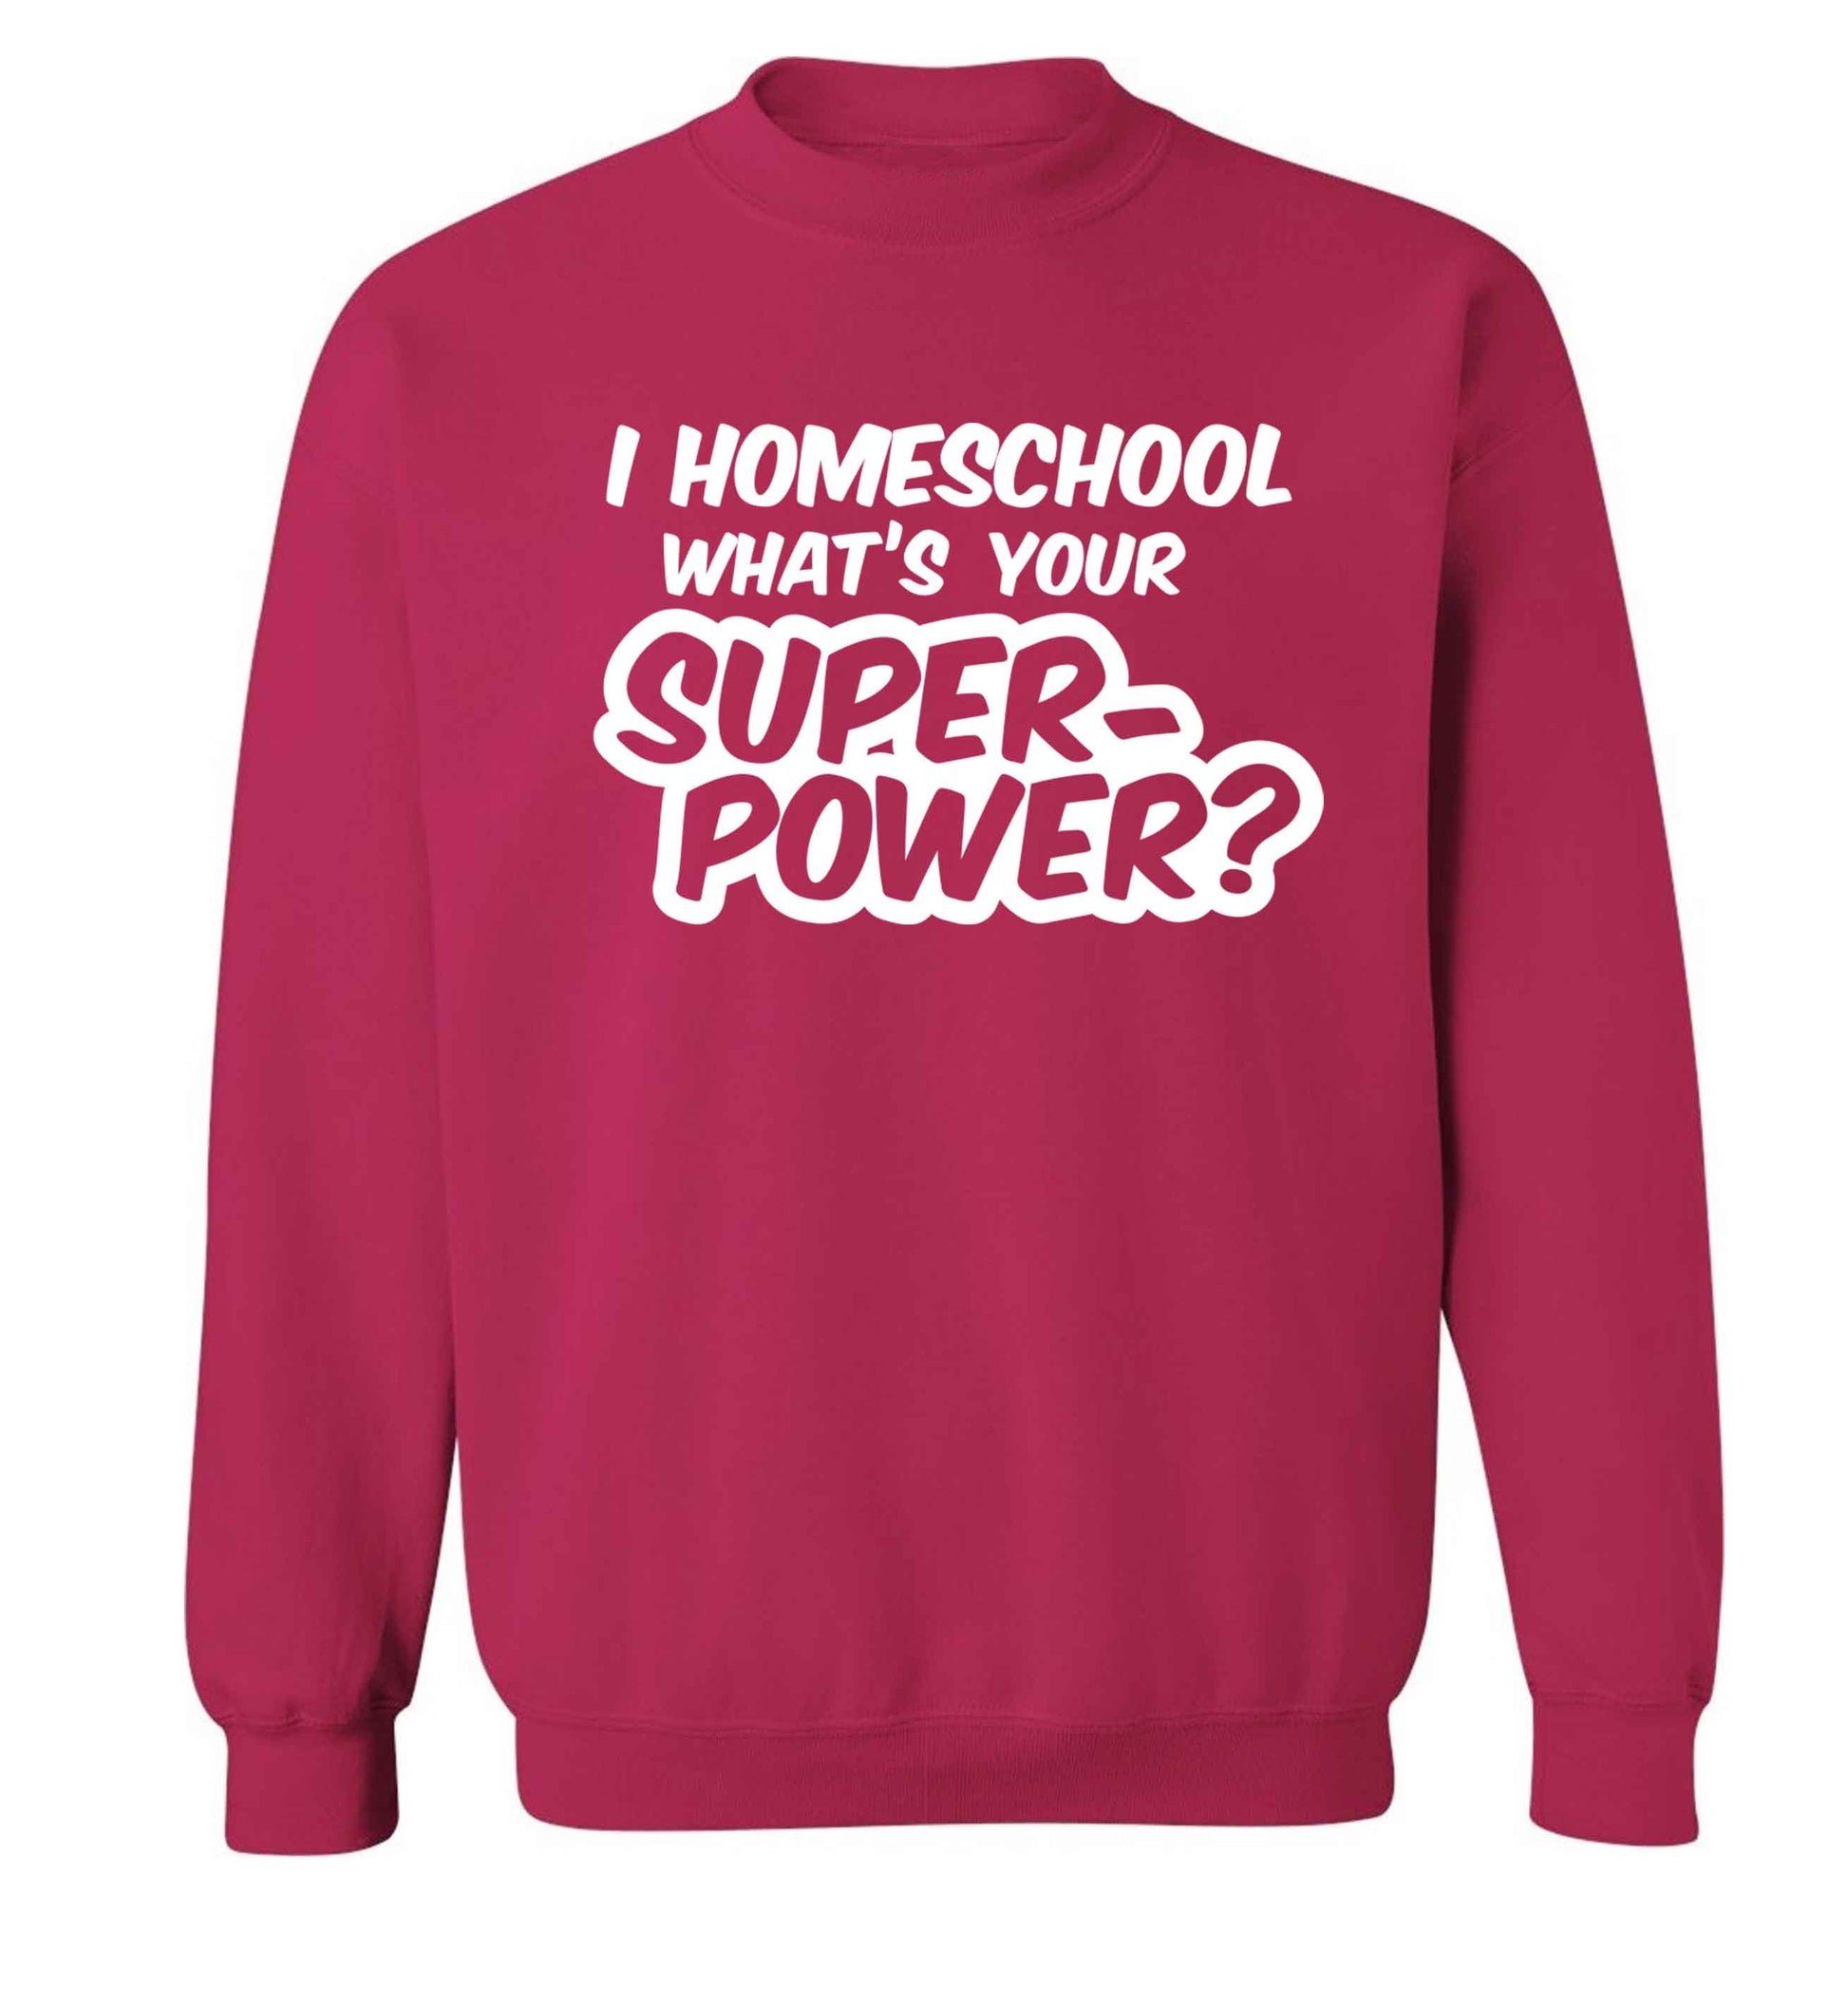 I homeschool what's your superpower? Adult's unisex pink Sweater 2XL